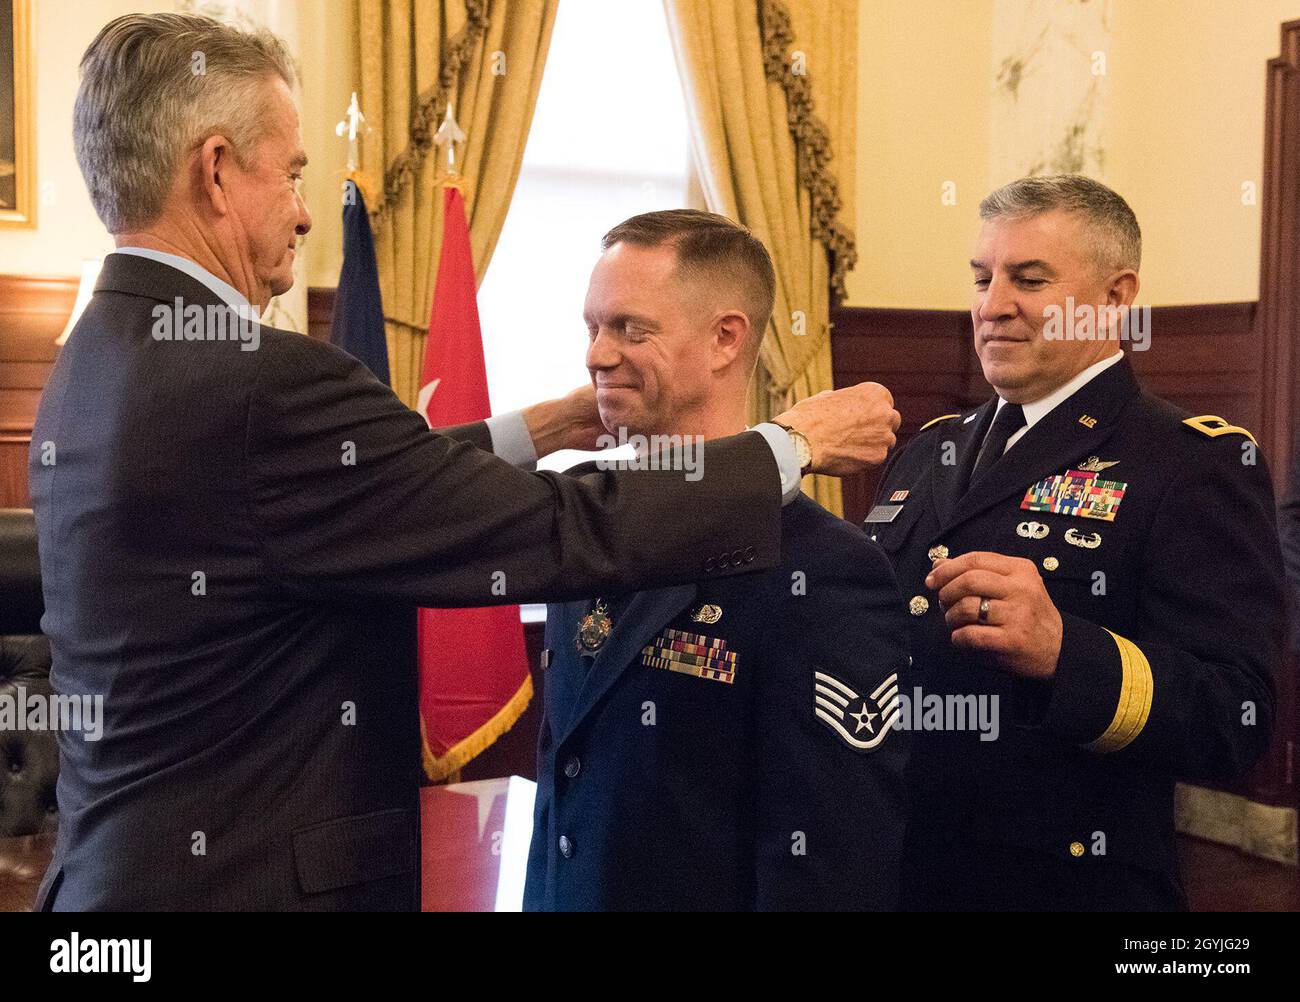 Idaho Governor Brad Little and Maj. Gen. Michael Garshak, adjutant general of Idaho, presented 124th Fighter Wing's Staff Sgt. Kyle Perkins with the Idaho Cross medal at the Idaho State Capitol on Jan. 2, 2020 for his significant act of heroism on the evening of June 14, 2019. Perkins quickly responded to a man sitting next to him in distress. Perkins and his wife, Allia, assessed and secured the scene and performed CPR until the paramedics arrived. His actions saved the man's life. The Idaho Cross is the highest state award presented to a military member or civilian employee of the Idaho Mili Stock Photo